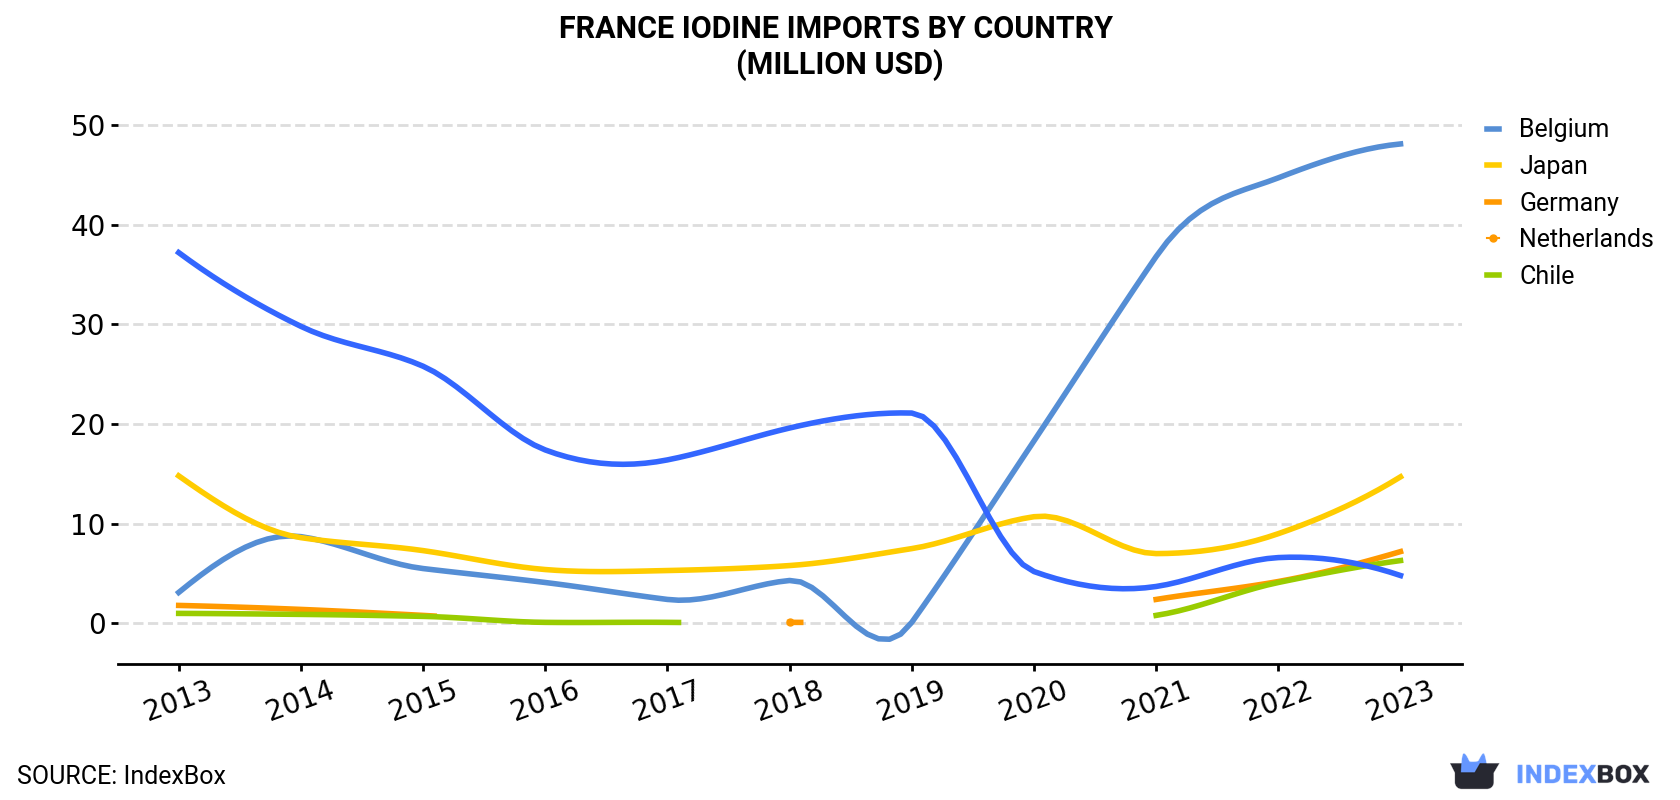 France Iodine Imports By Country (Million USD)